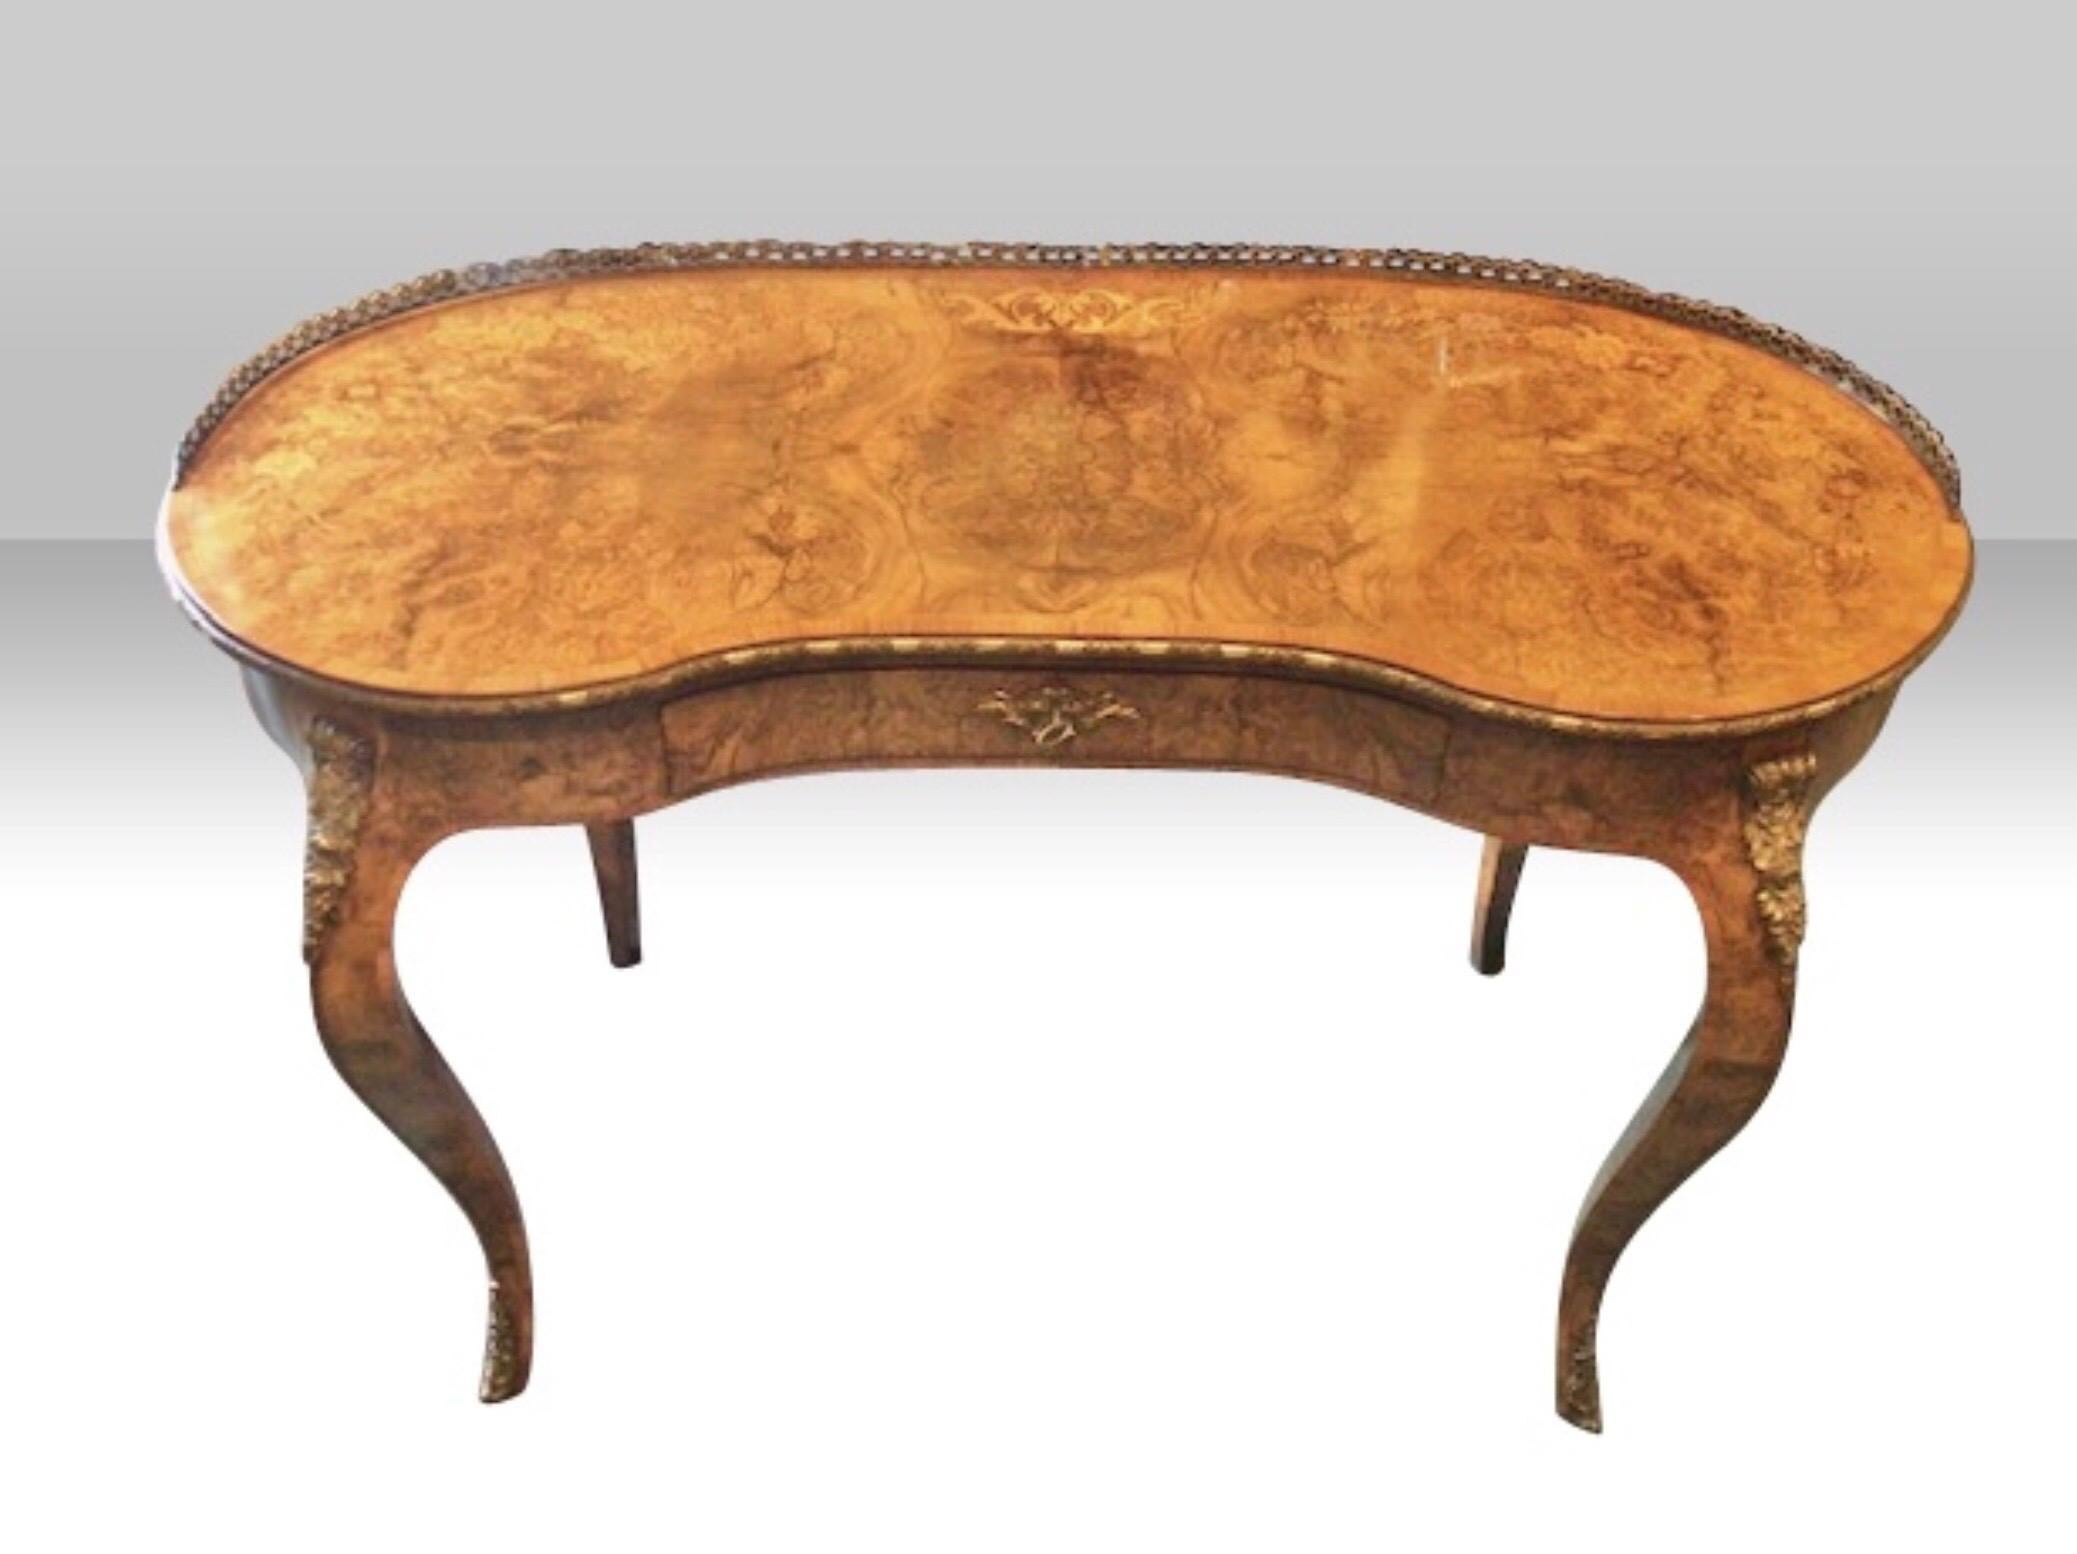 Antique Inlaid and Marquetry Burr Walnut Kidney Shaped Table Desk In Good Condition For Sale In Antrim, GB